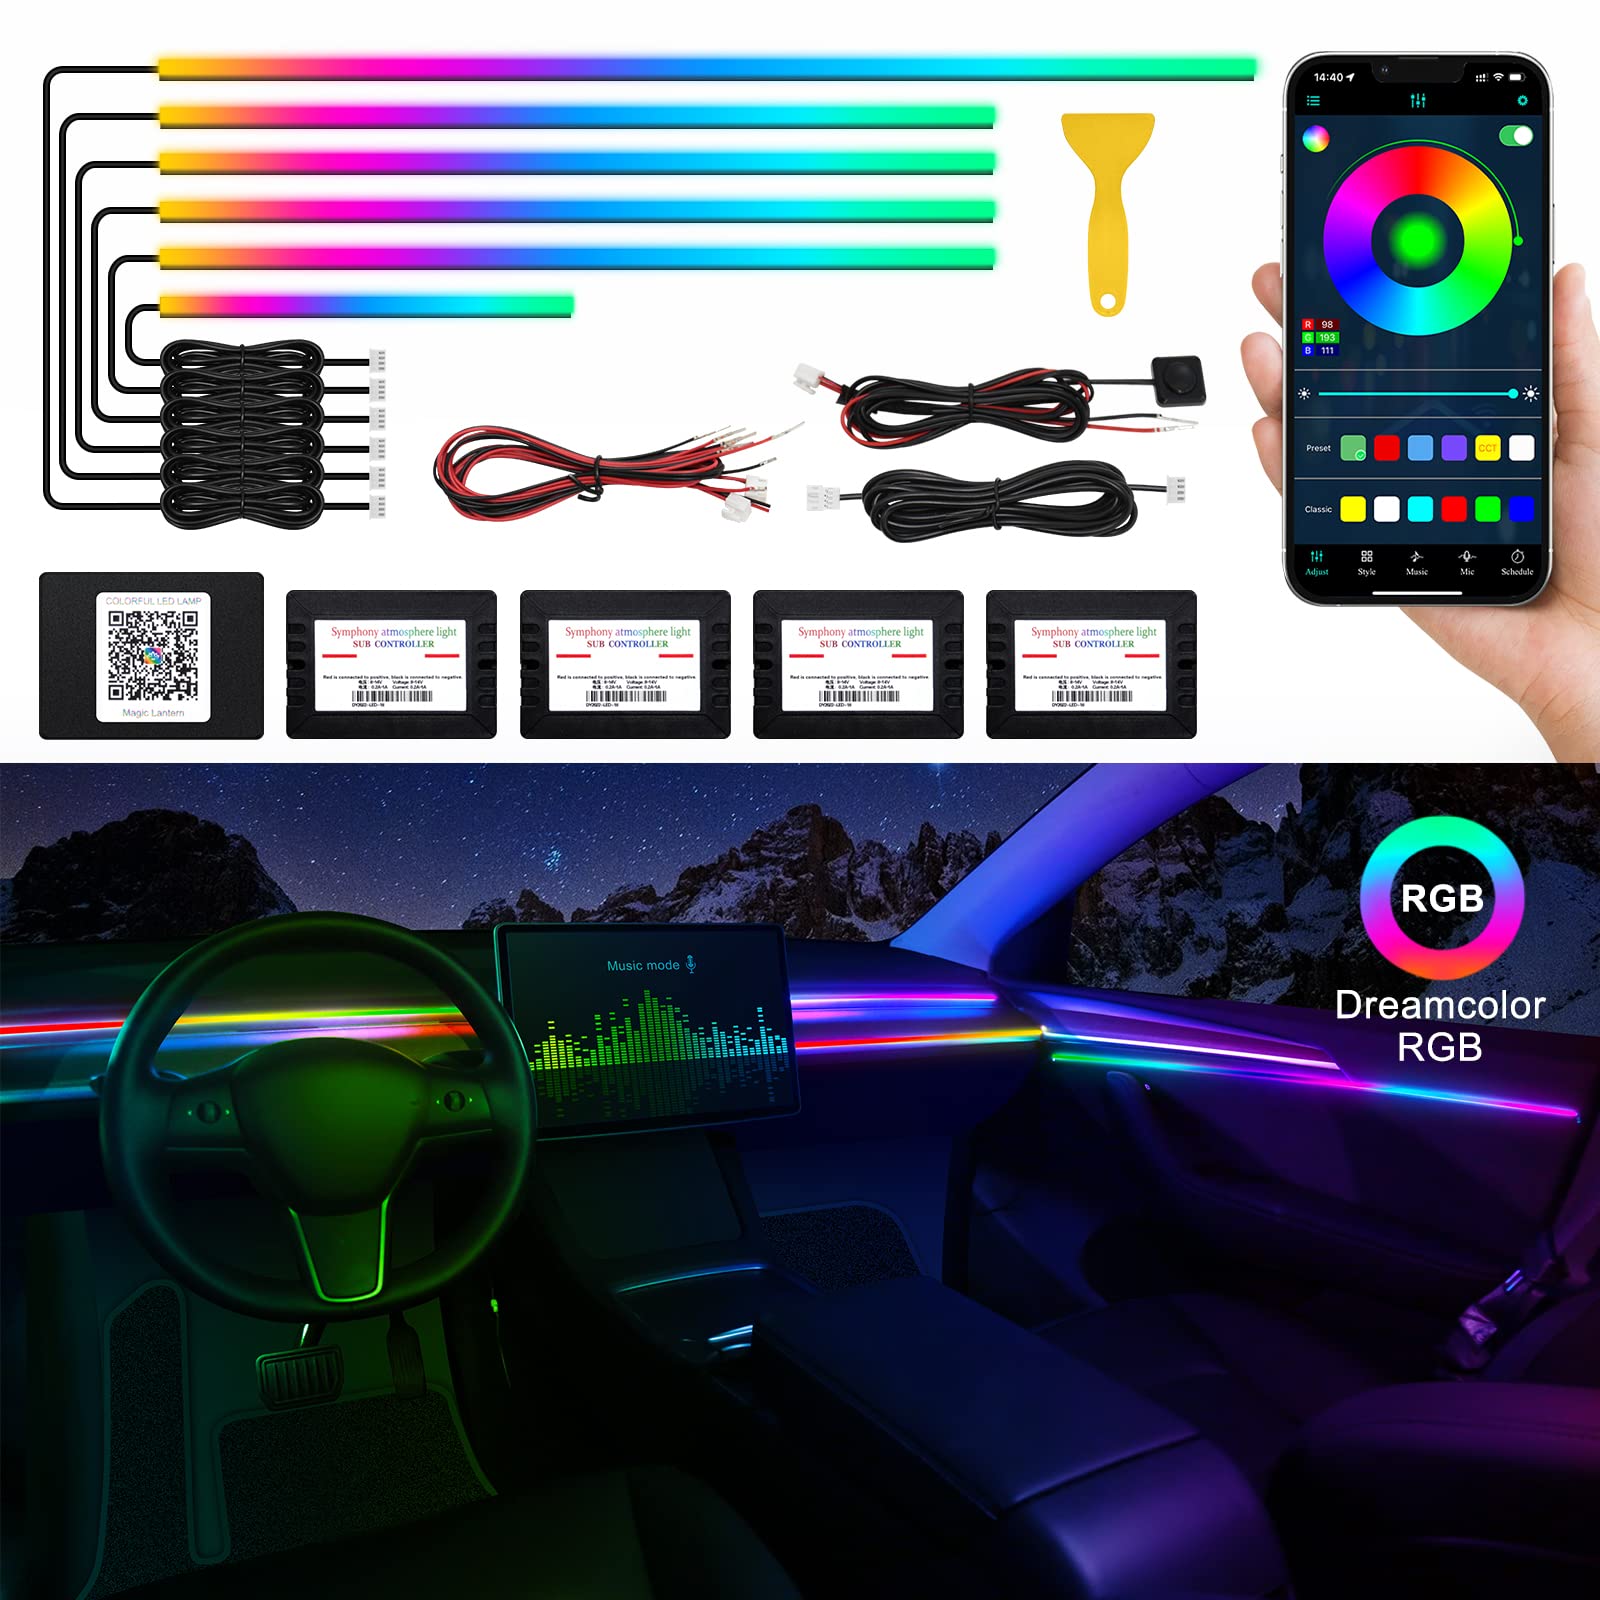 Acrylic Interior Car LED Strip Light with Wireless APP, RGB Dreamcolor 6 in 1 with 175 inches 593 LEDs Fiber Optic Ambient Lighting Kits, 16 Million Colors Sound Active Function Car Neon Lights von TWETIZ